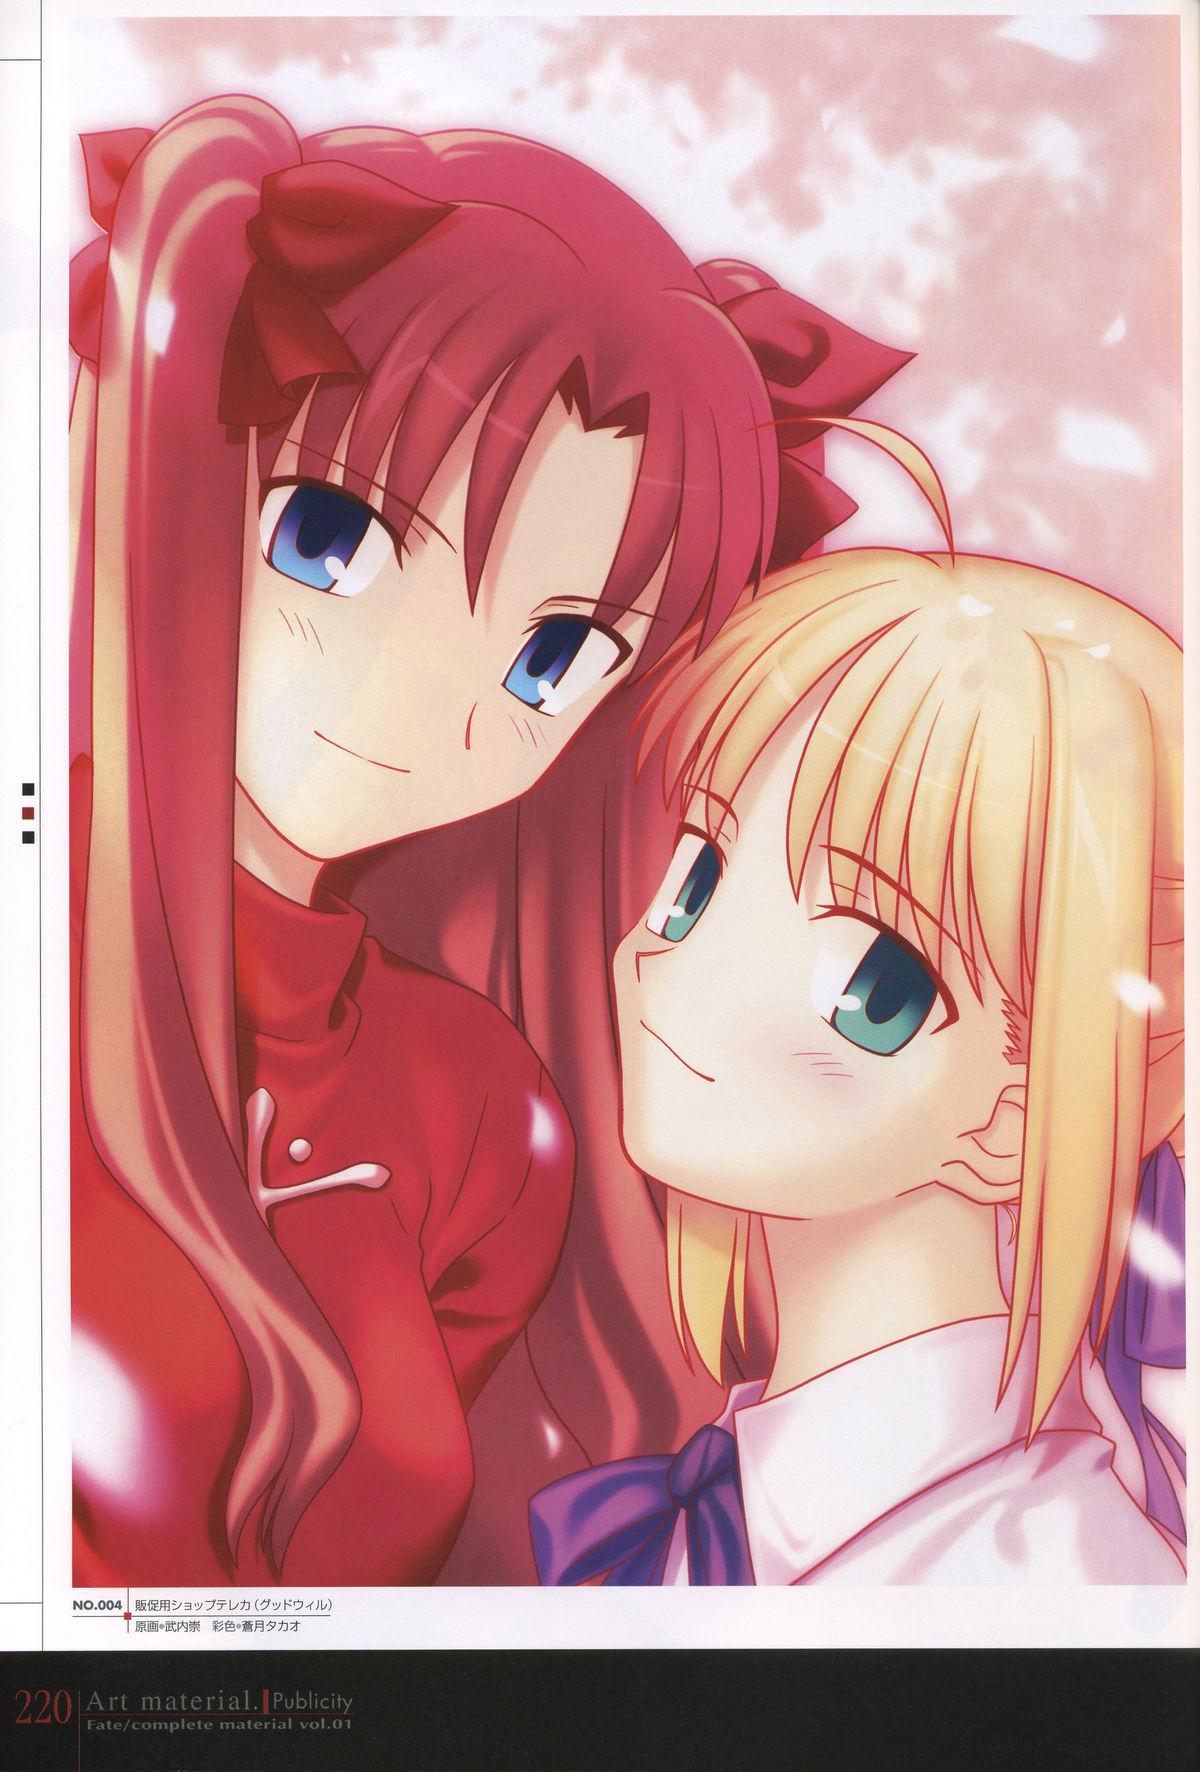 Fate/complete material I - Art material. 224